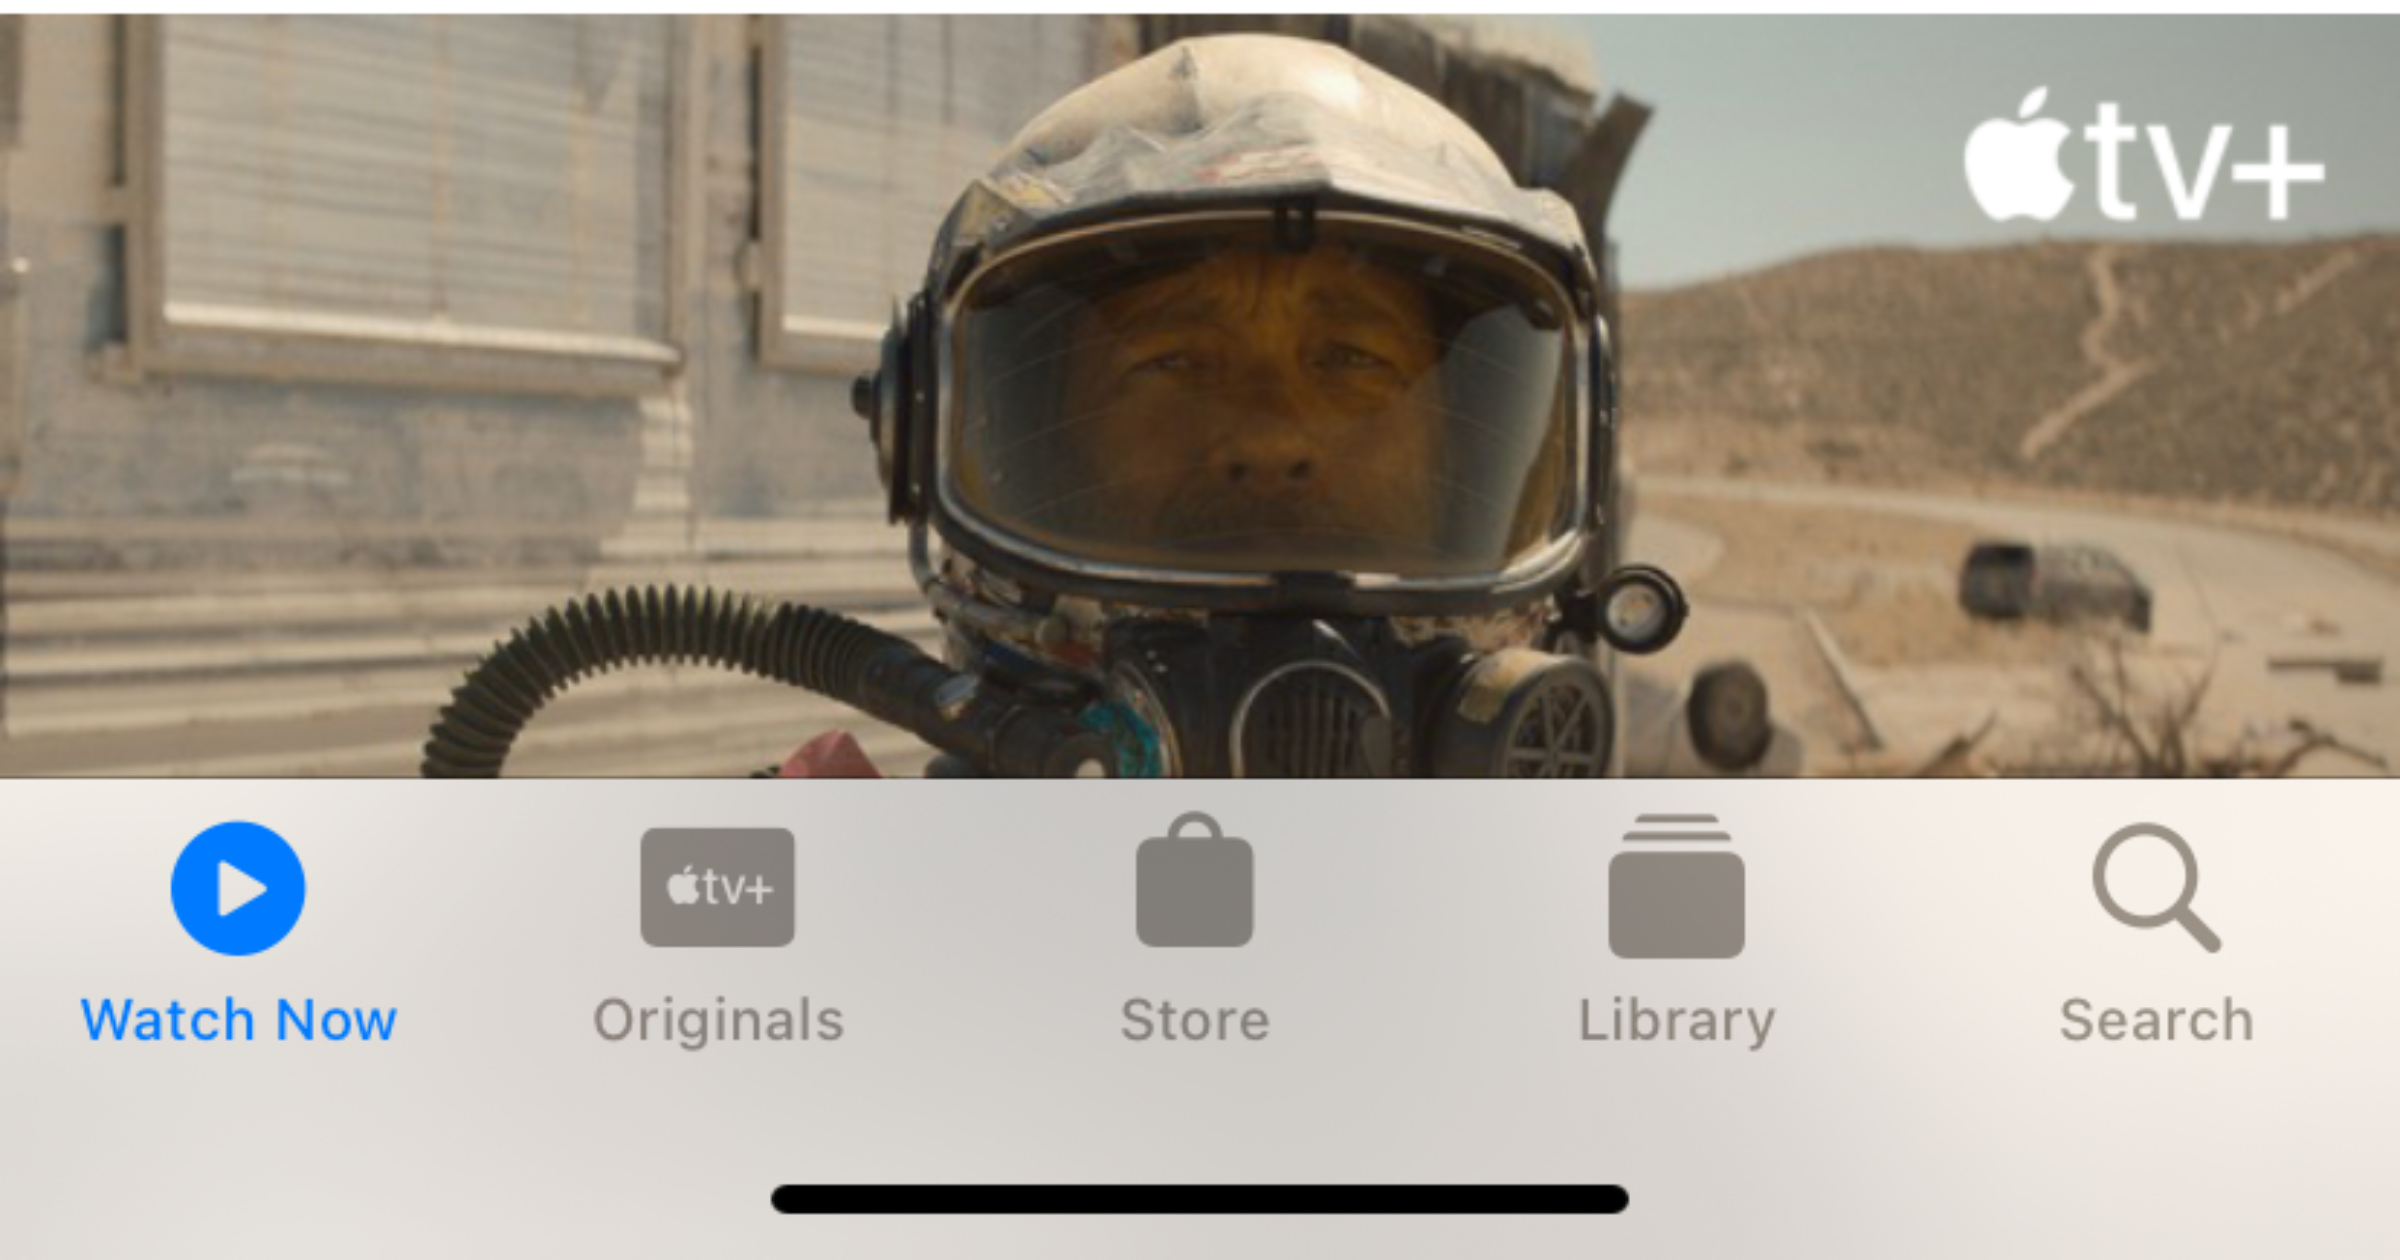 iOS 15.2 Beta Two Adds ‘Store’ Tab to TV App